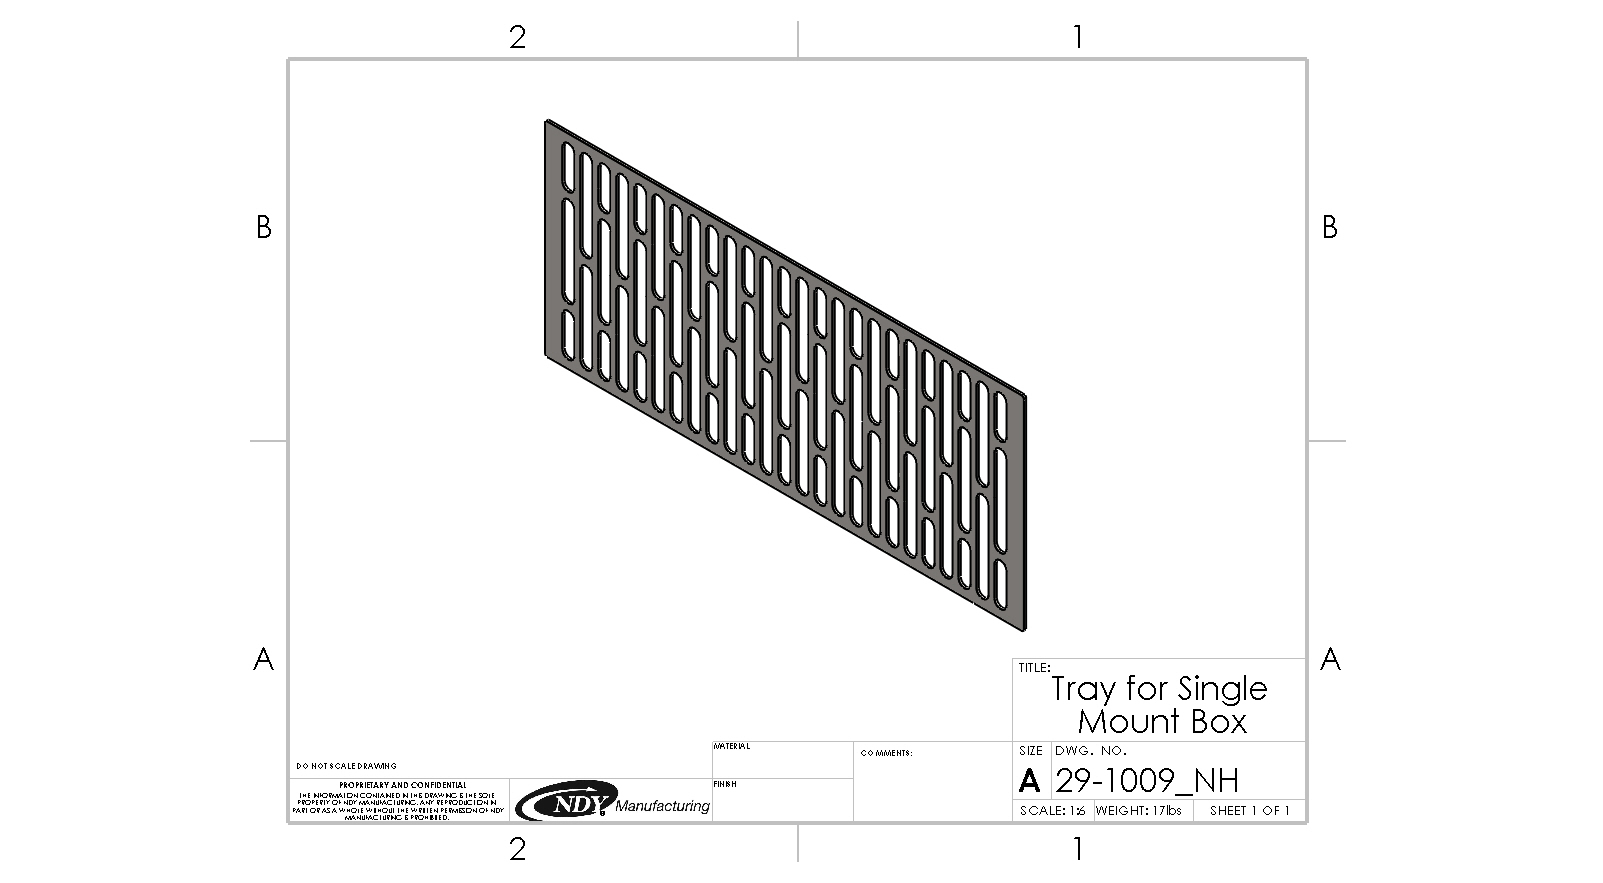 A drawing of a Rock Box Tray for Single Mount Box